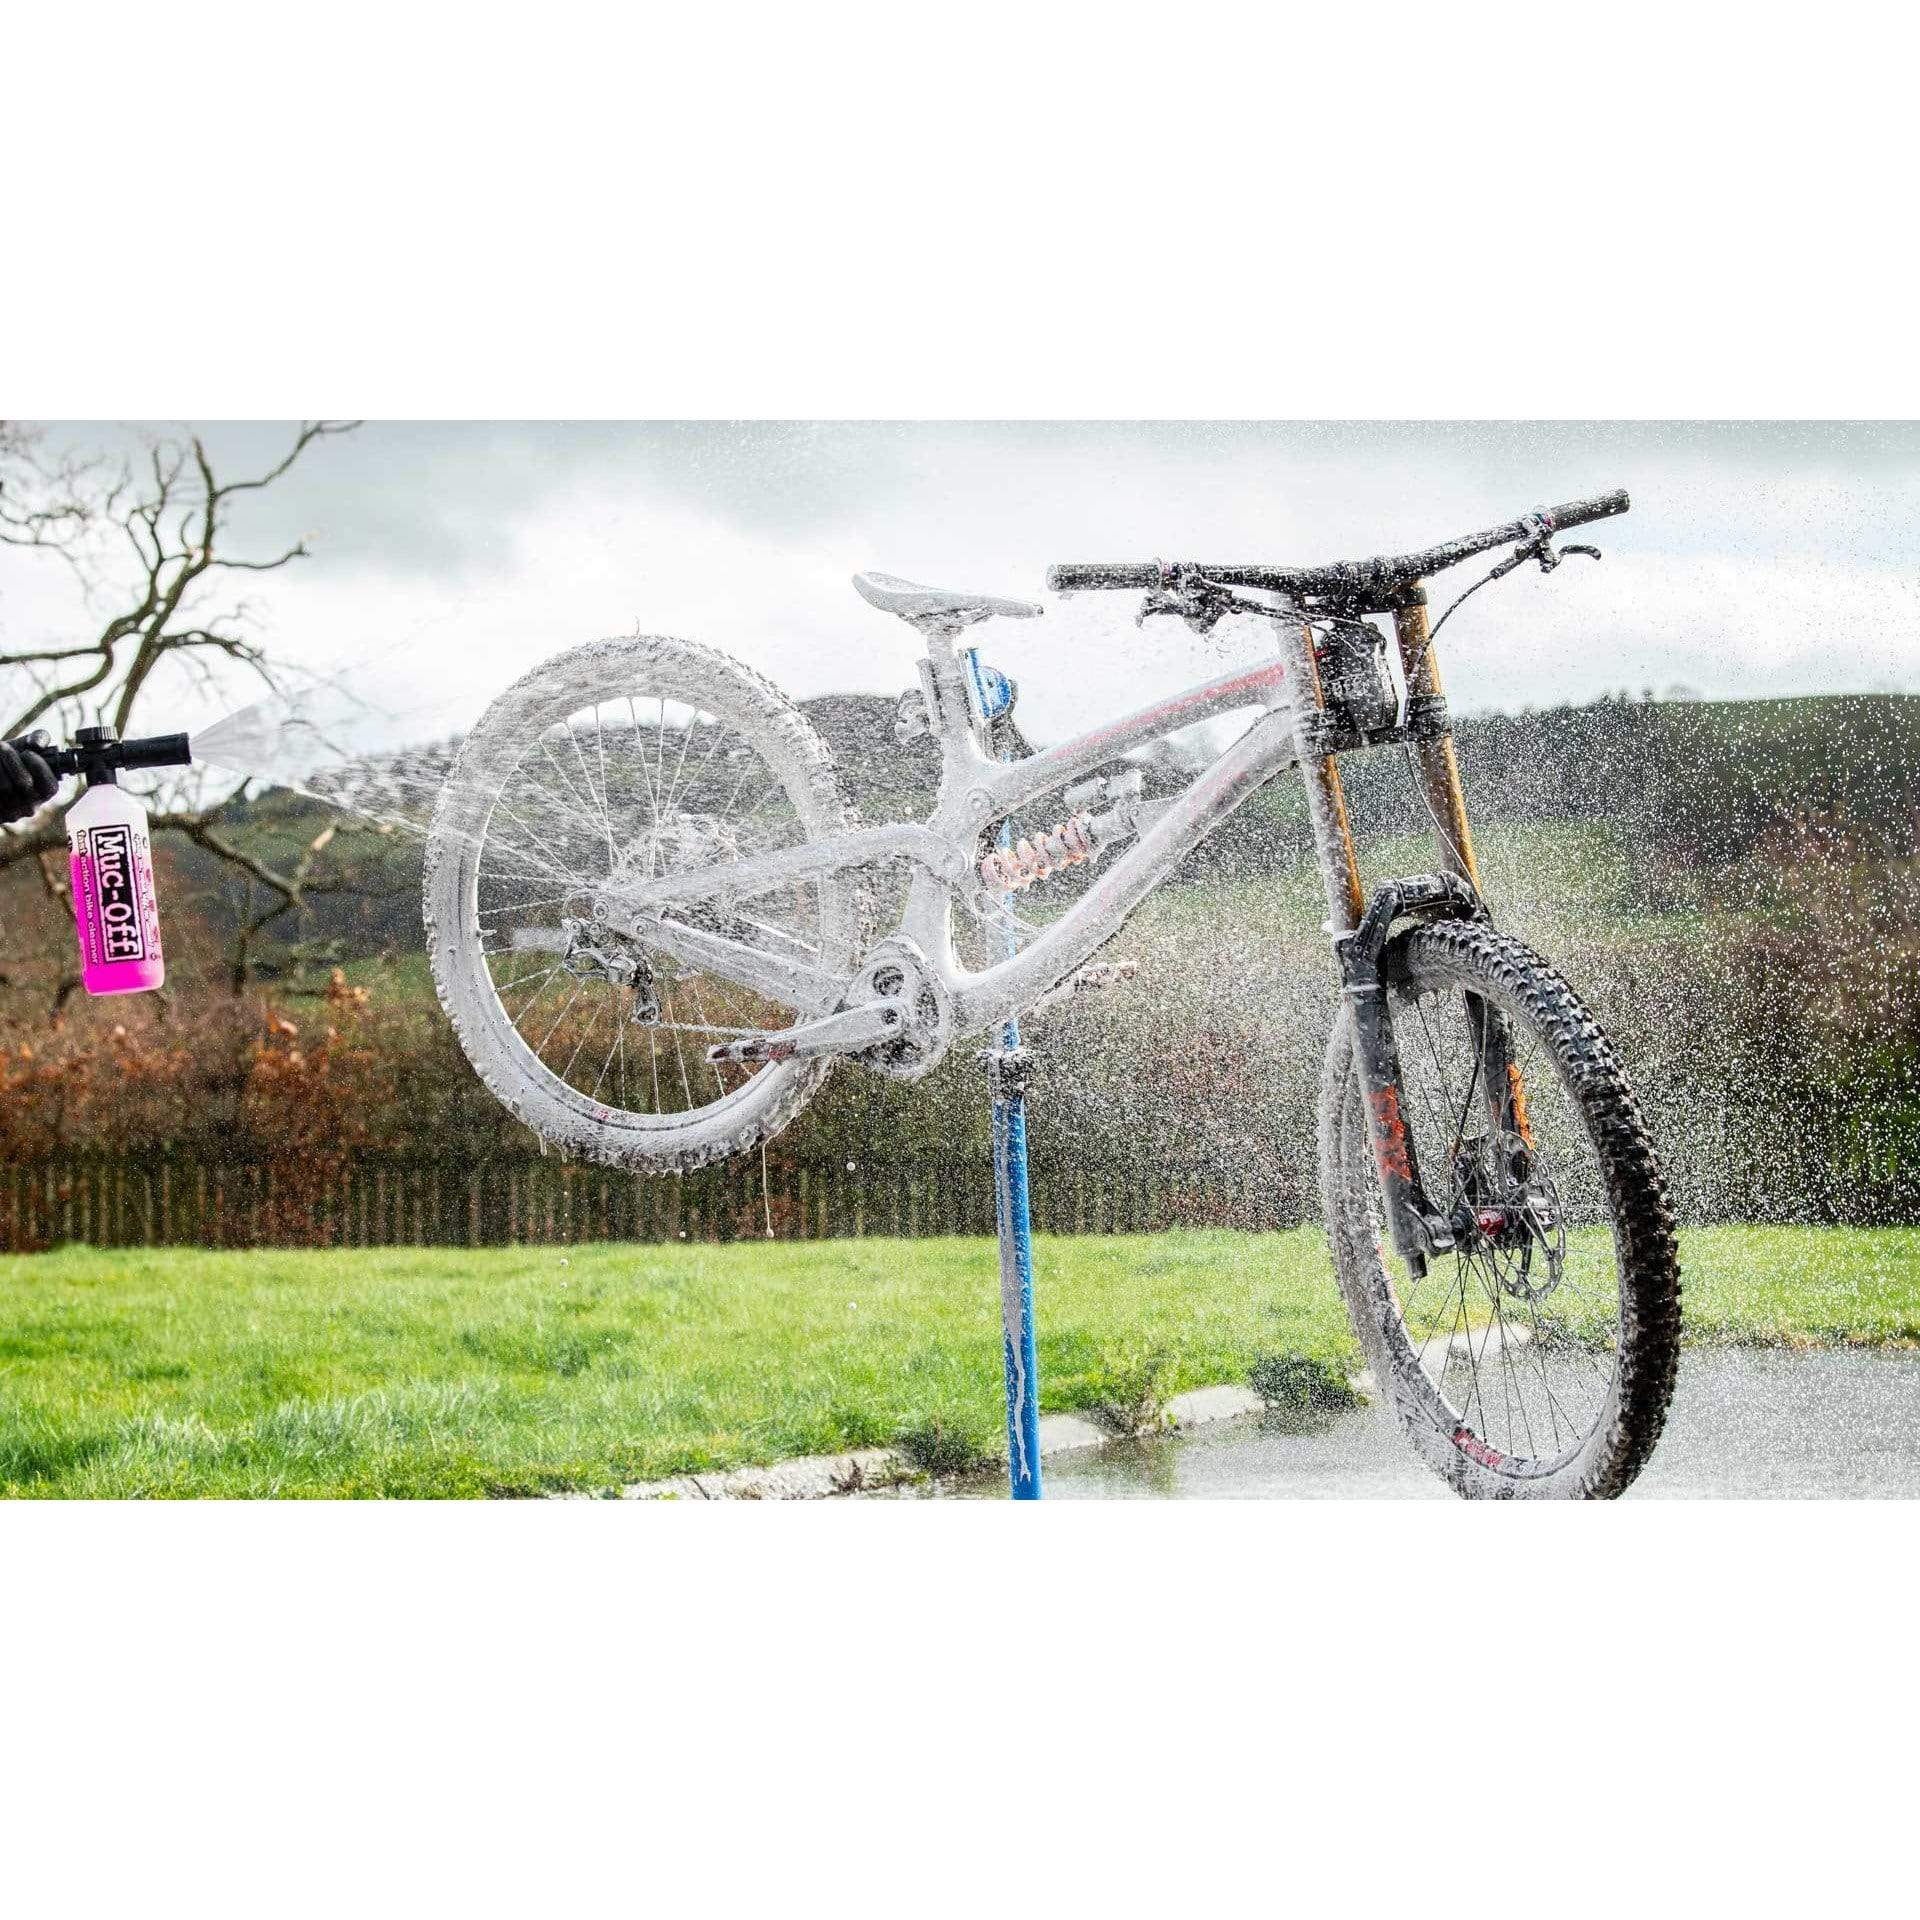 Muc-Off Concentrated Gel Bike Cleaner